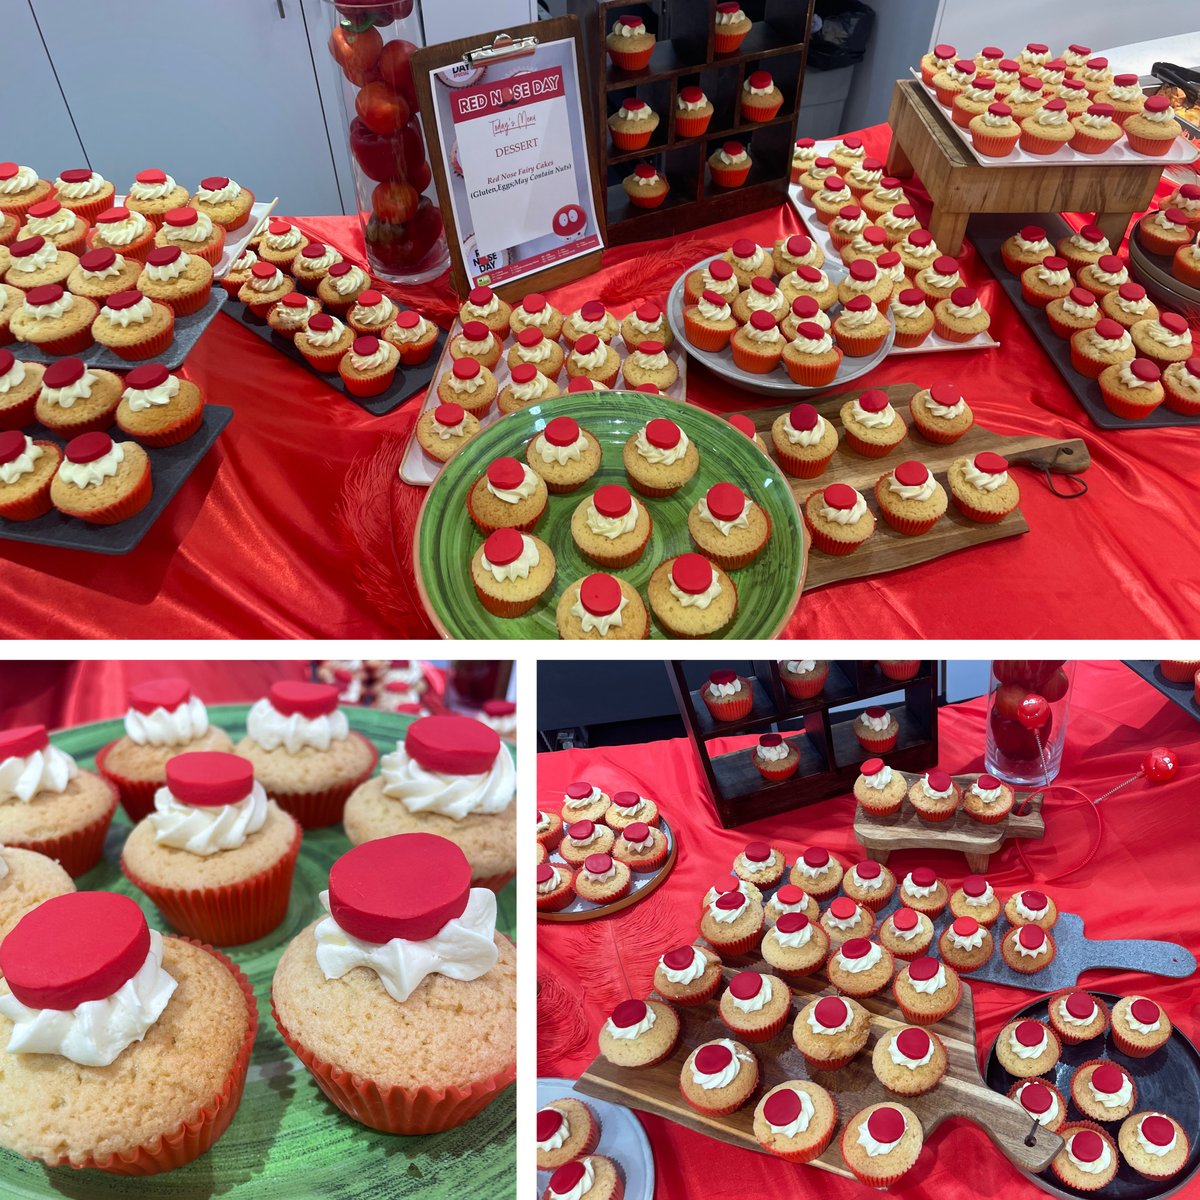 Our sites were busy supporting Red Nose Day last Friday, the best way we know how - baking! 🍰🔴 #RedNoseDay #bakingforacause #charitybaking #communitysupport